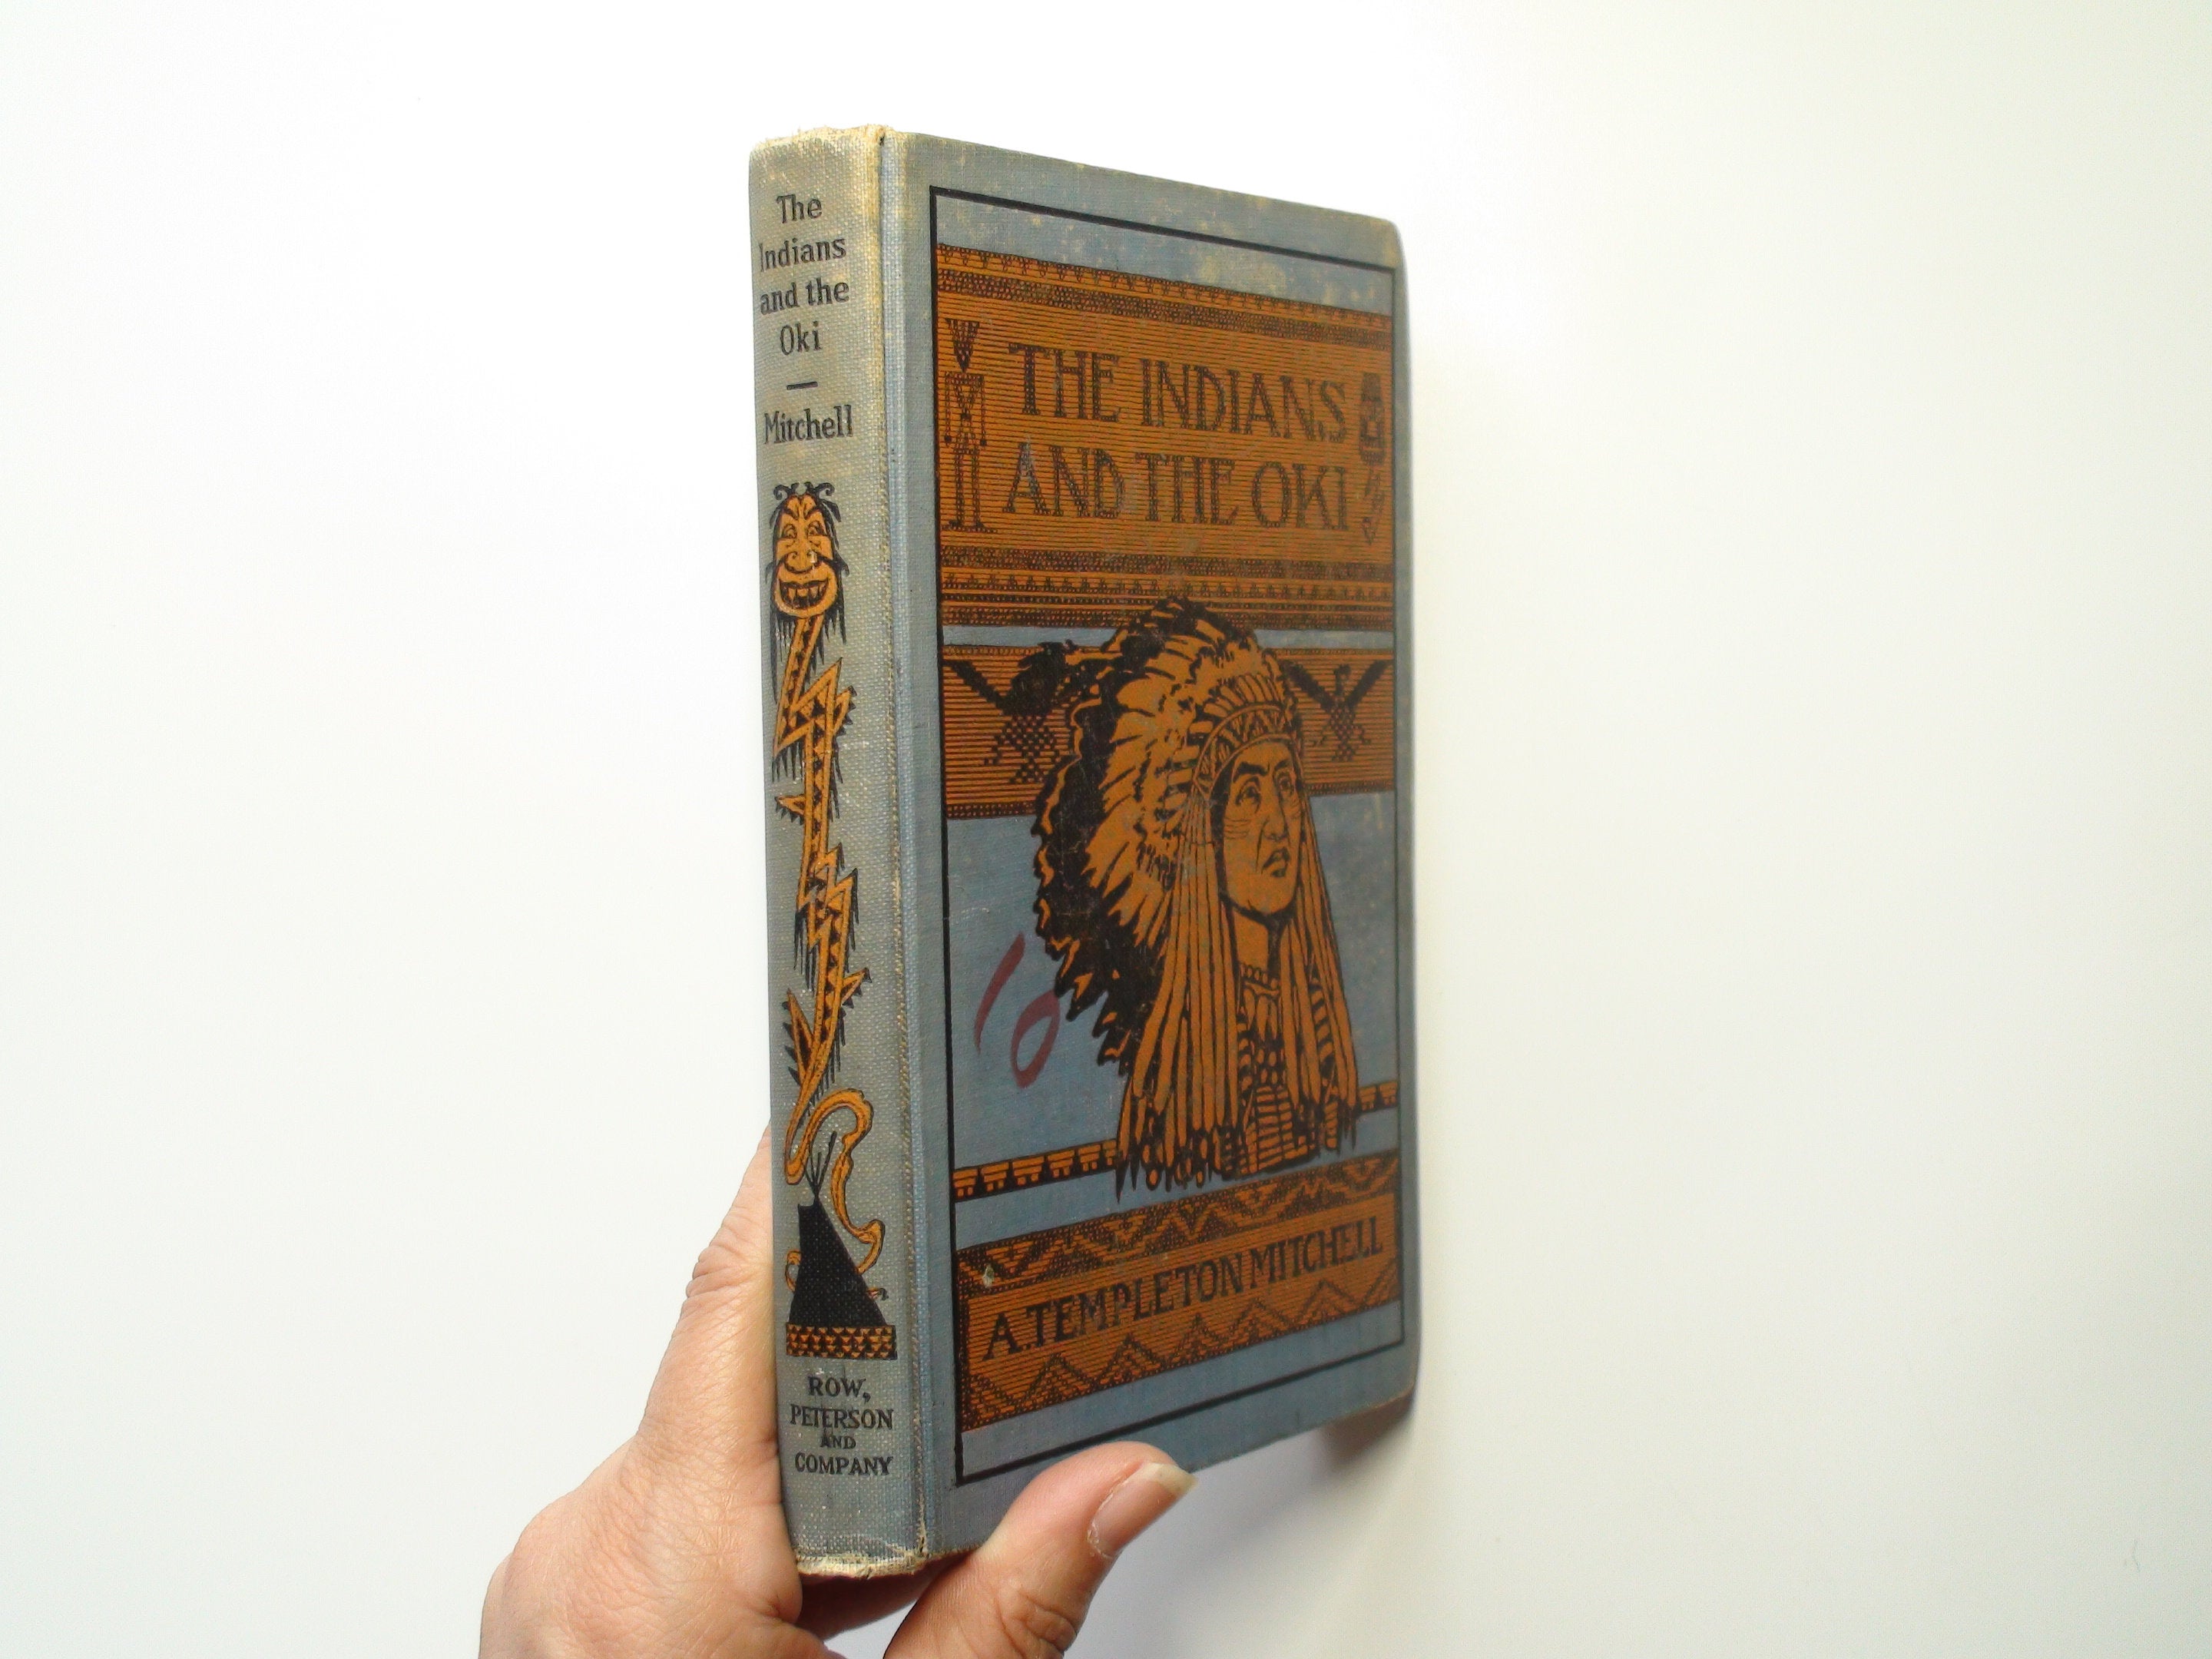 The Indians And The Oki, A. Templeton Mitchell, Illustrated, 1st Ed, 1925